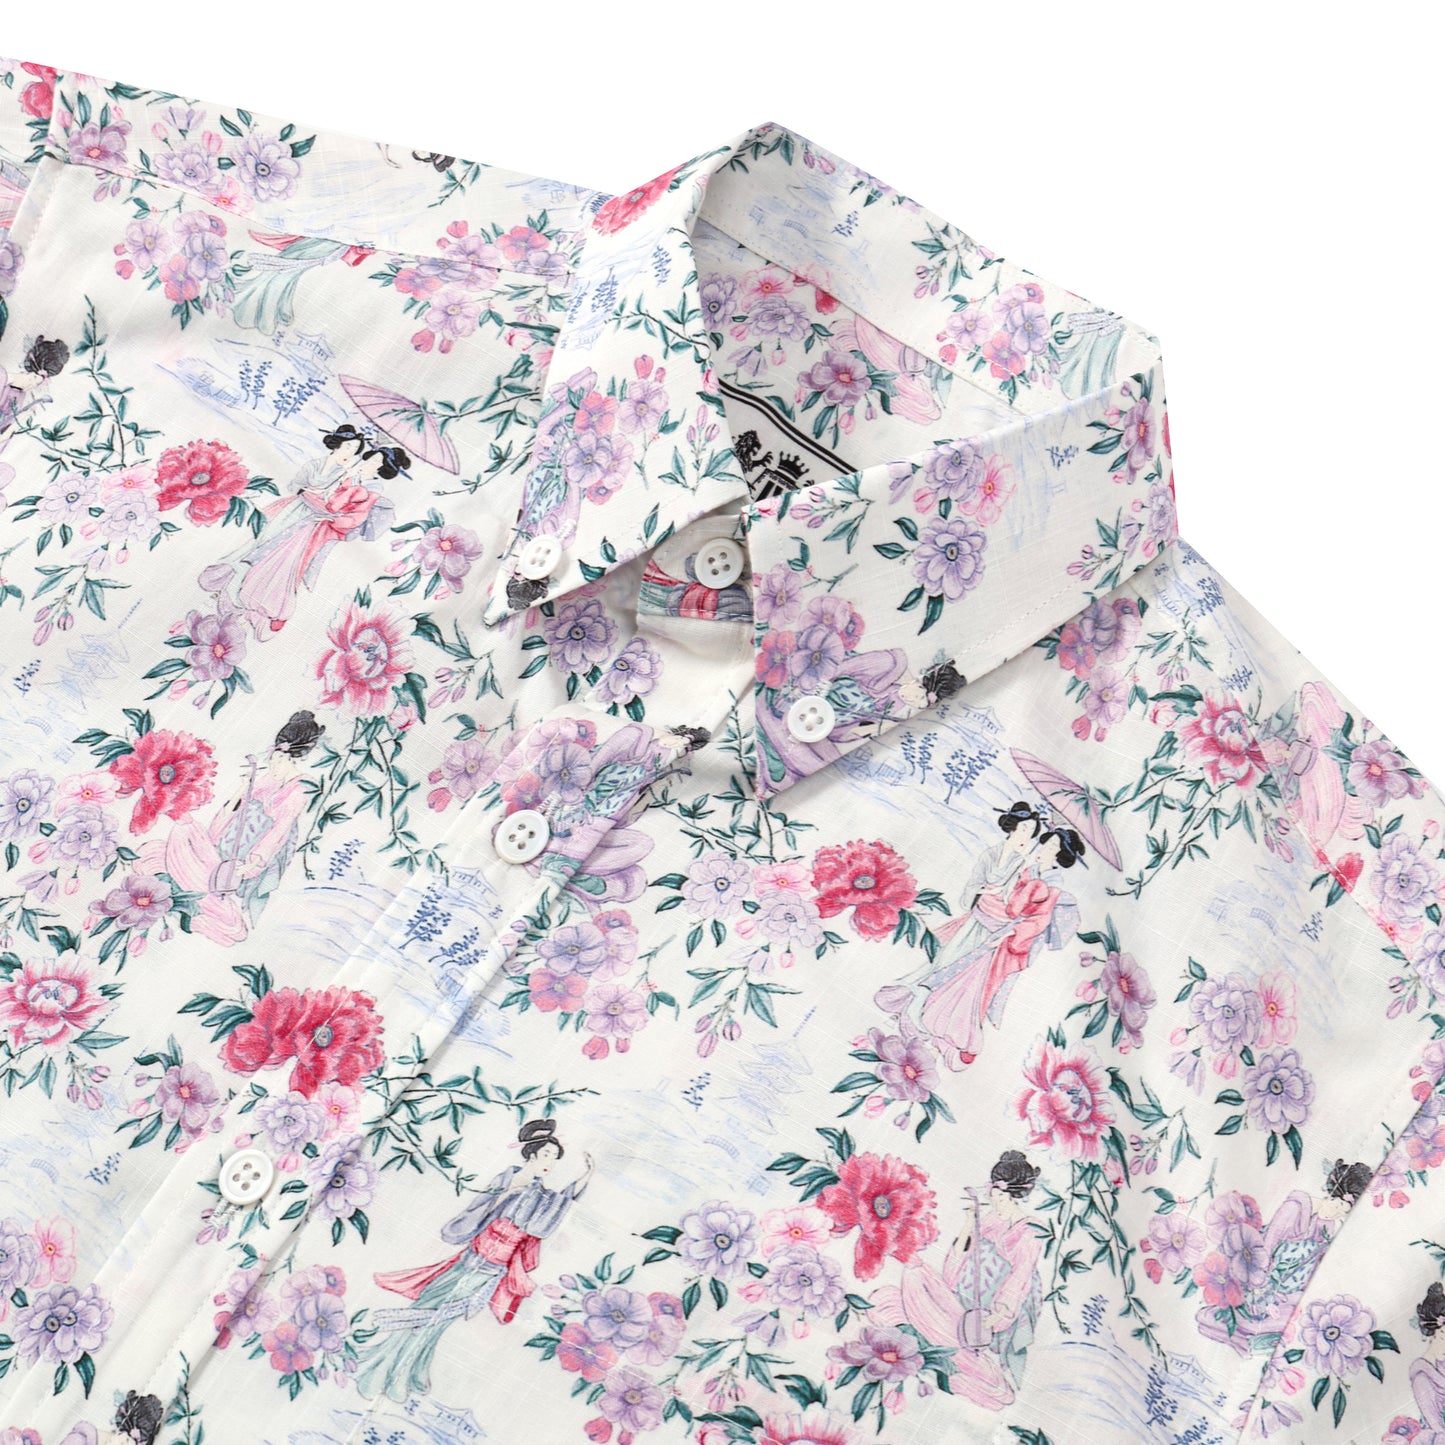 Ancient Female Floral Pattern Button Short Sleeve Shirt